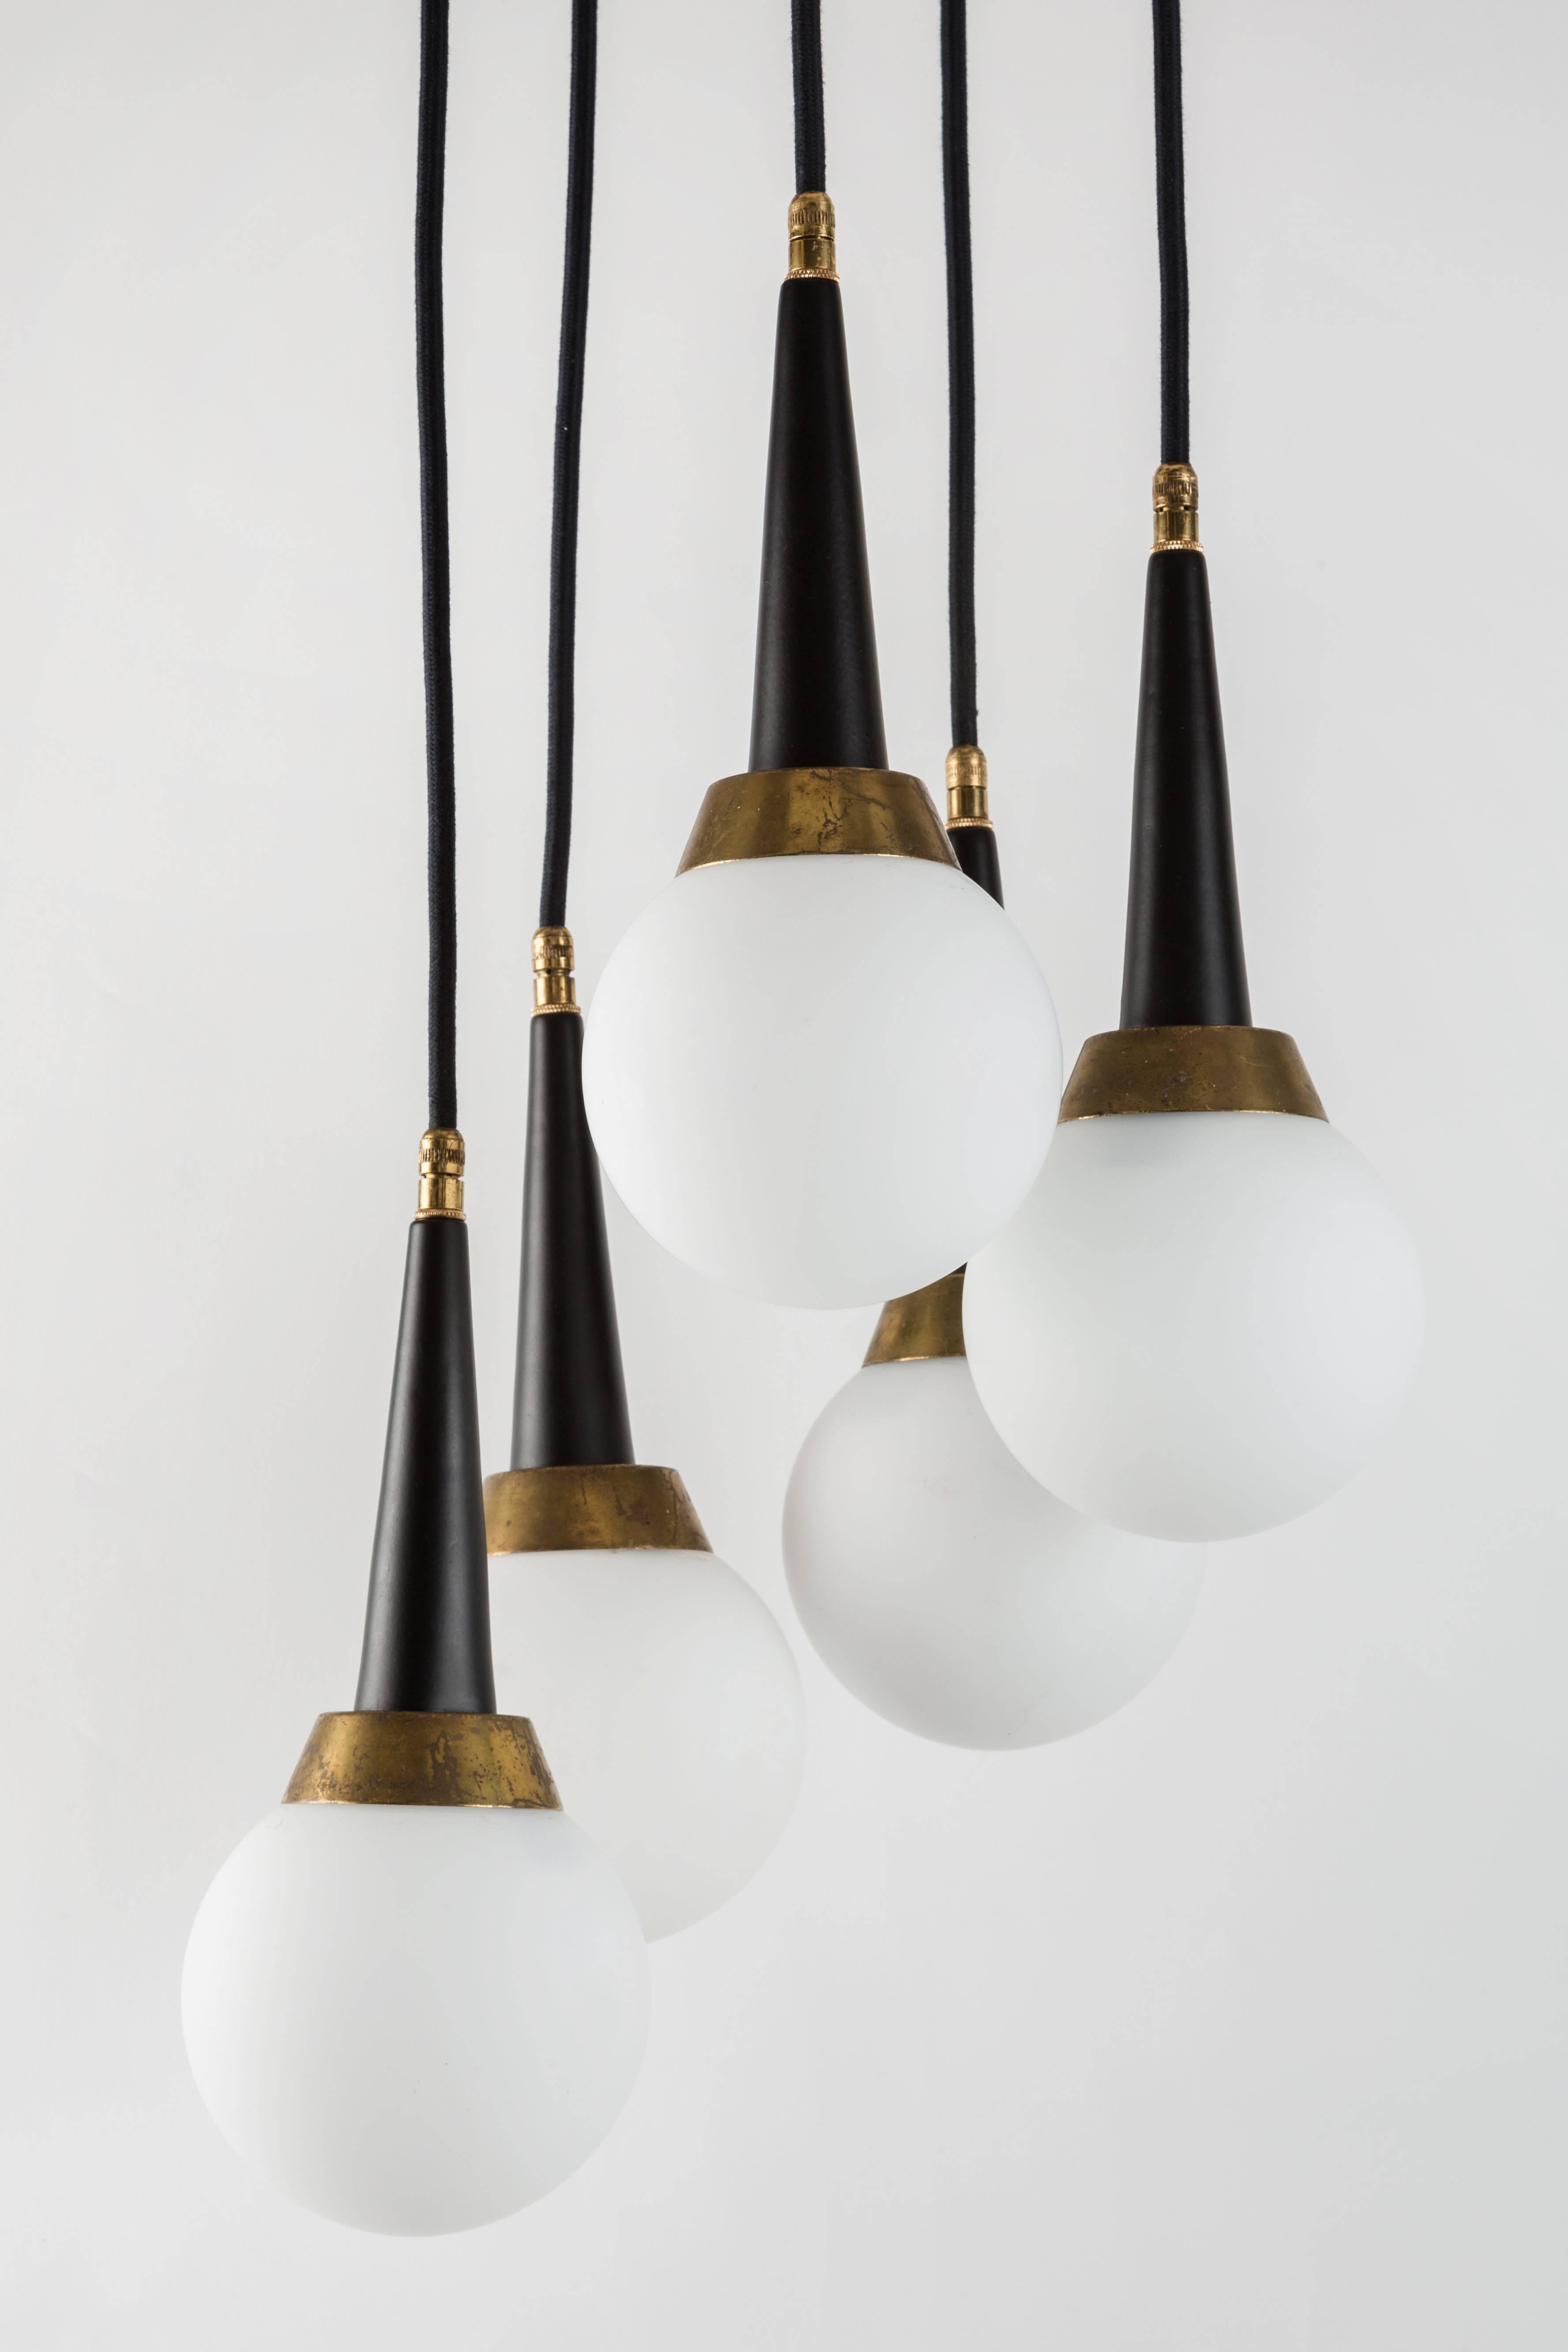 1960s Stilnovo five-globe cascading chandelier.An iconic Midcentury design executed in matte finish opaline glass, brass and enameled metal with original architectural ceiling canopy. A highly functional Italian light sculpture of attractive scale